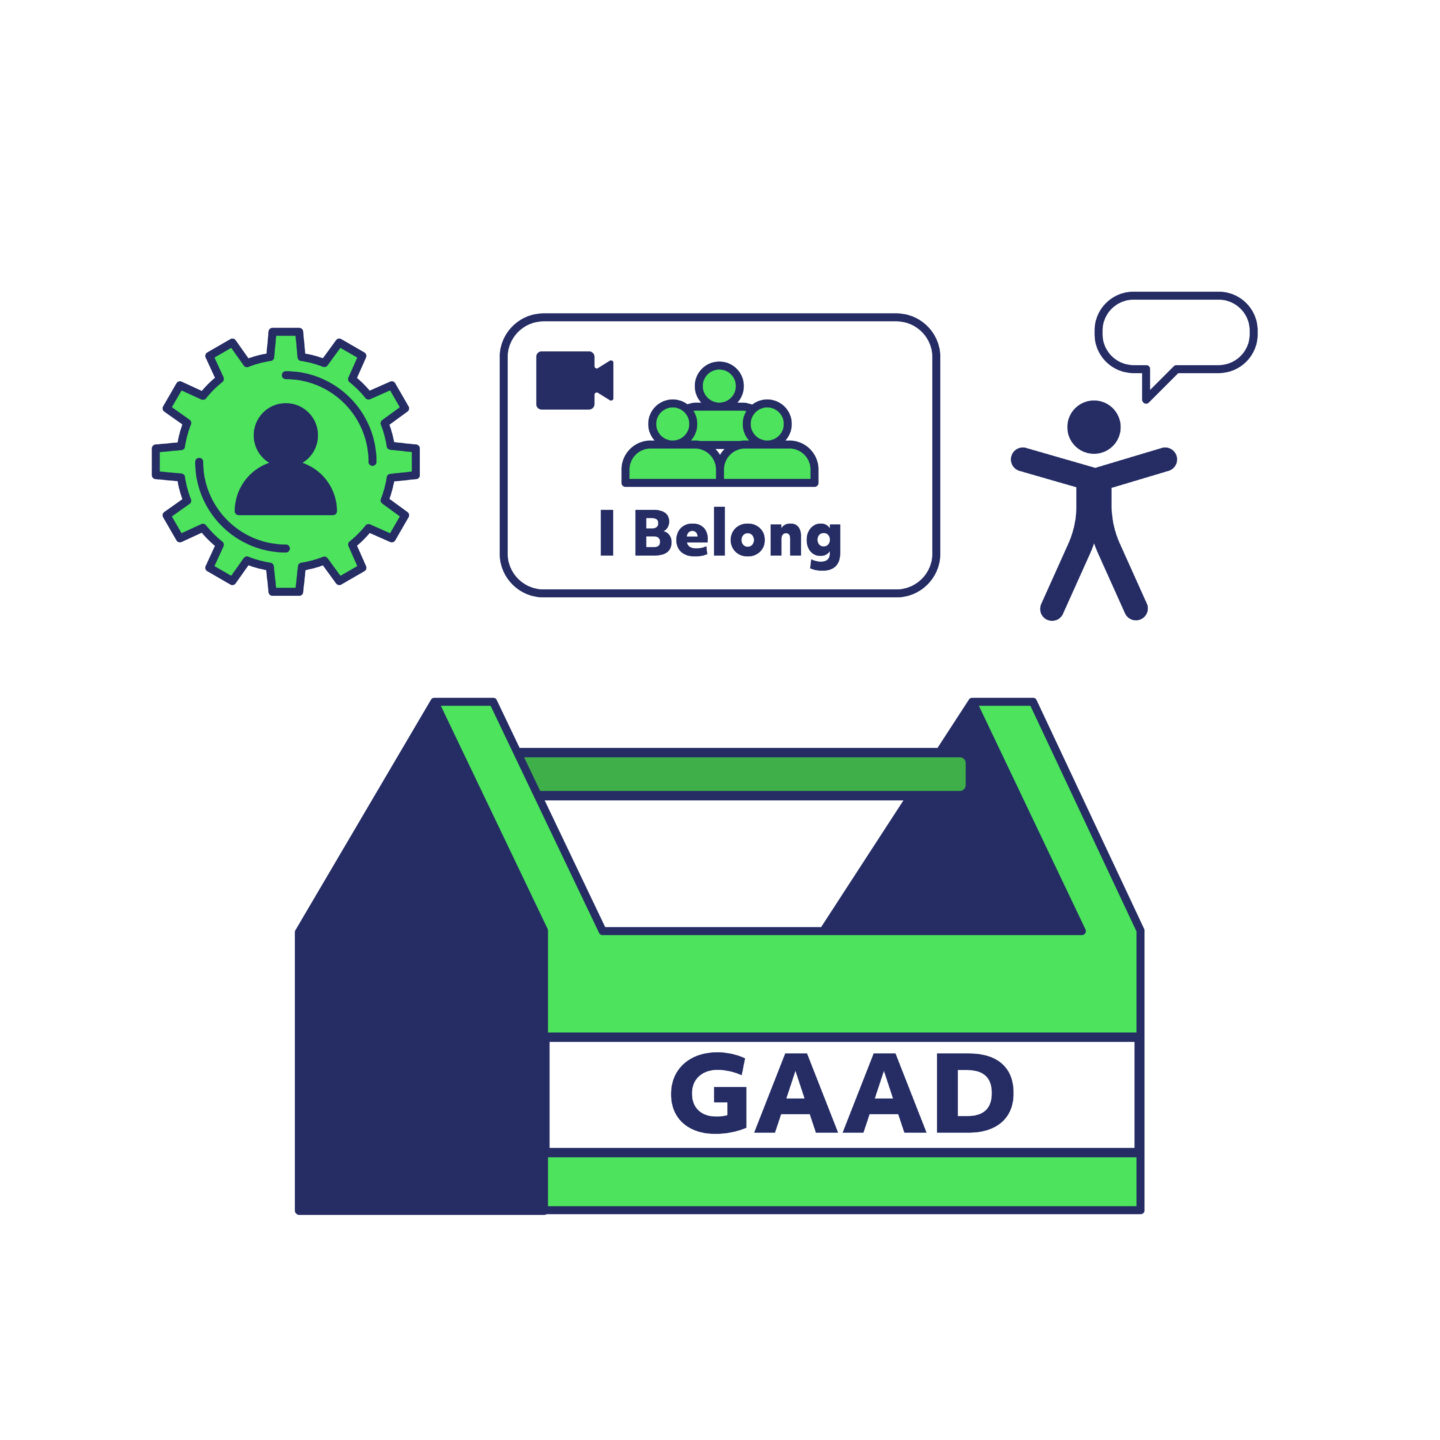 Icons of GAAD toolbox in neon green and navy blue with gear icon, I Belong video with three silhouettes, and accessibility symbol.